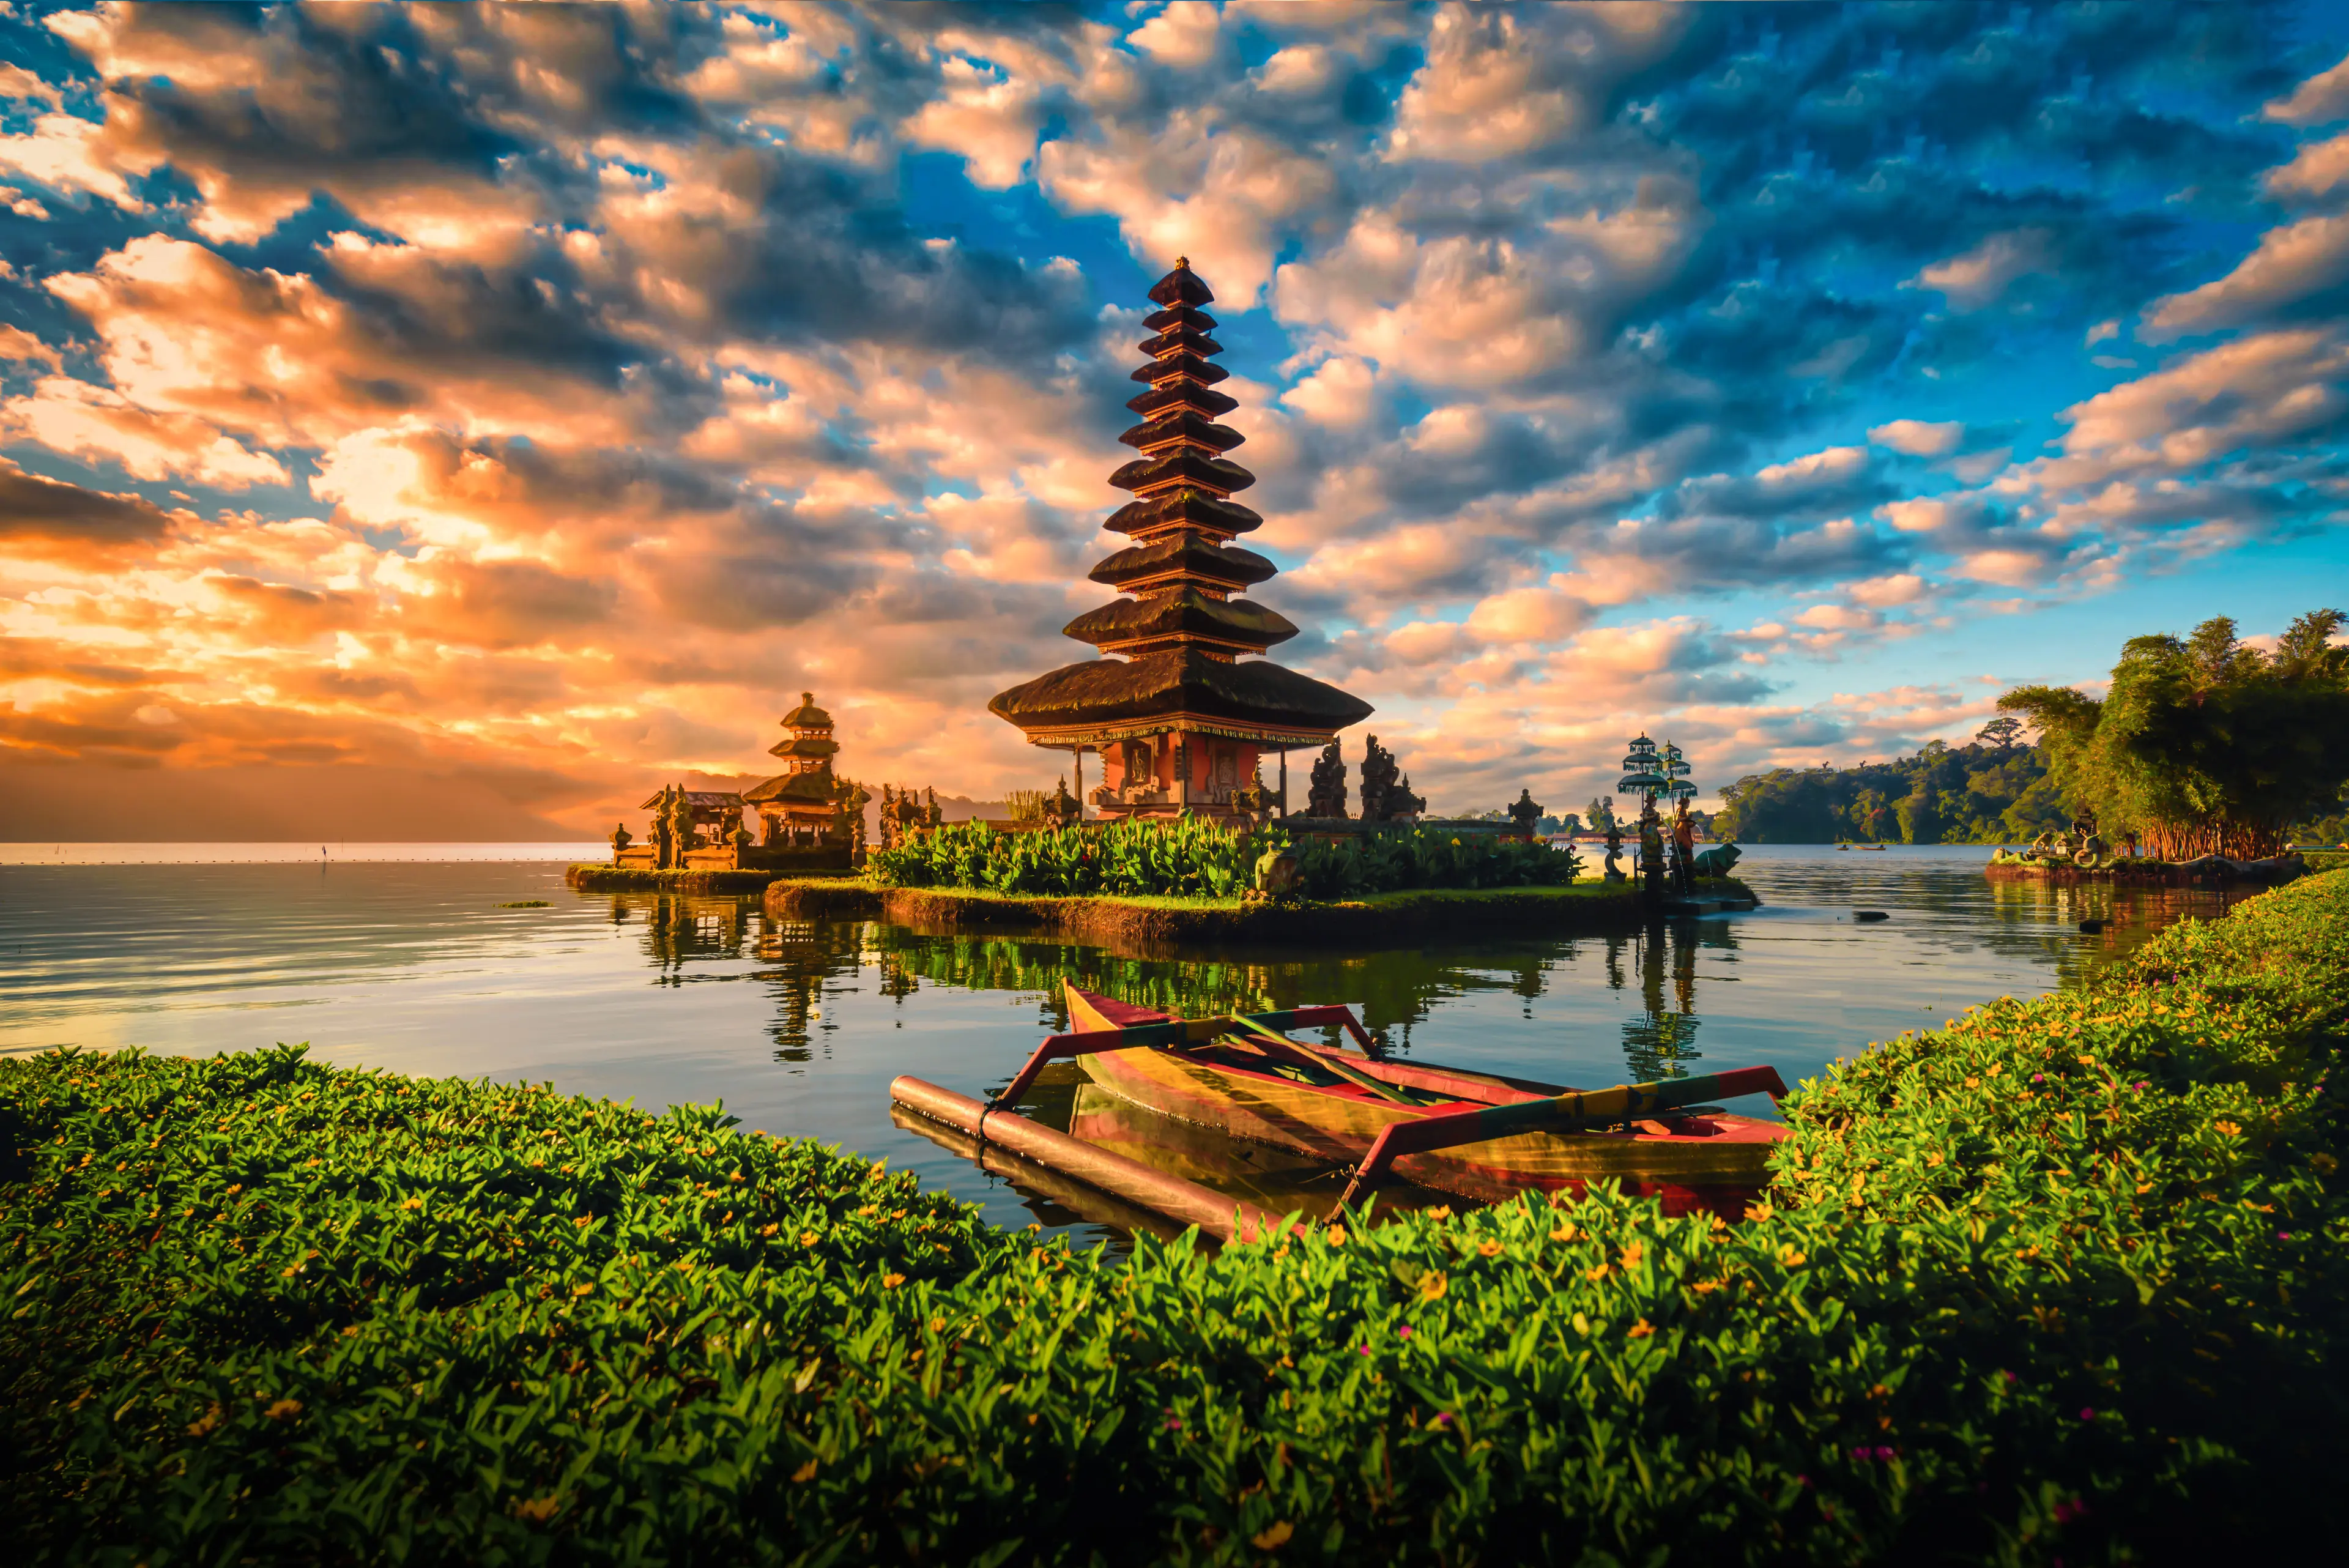 6-Day Authentic Bali Getaway: Sightseeing & Outdoor Activities for Couples